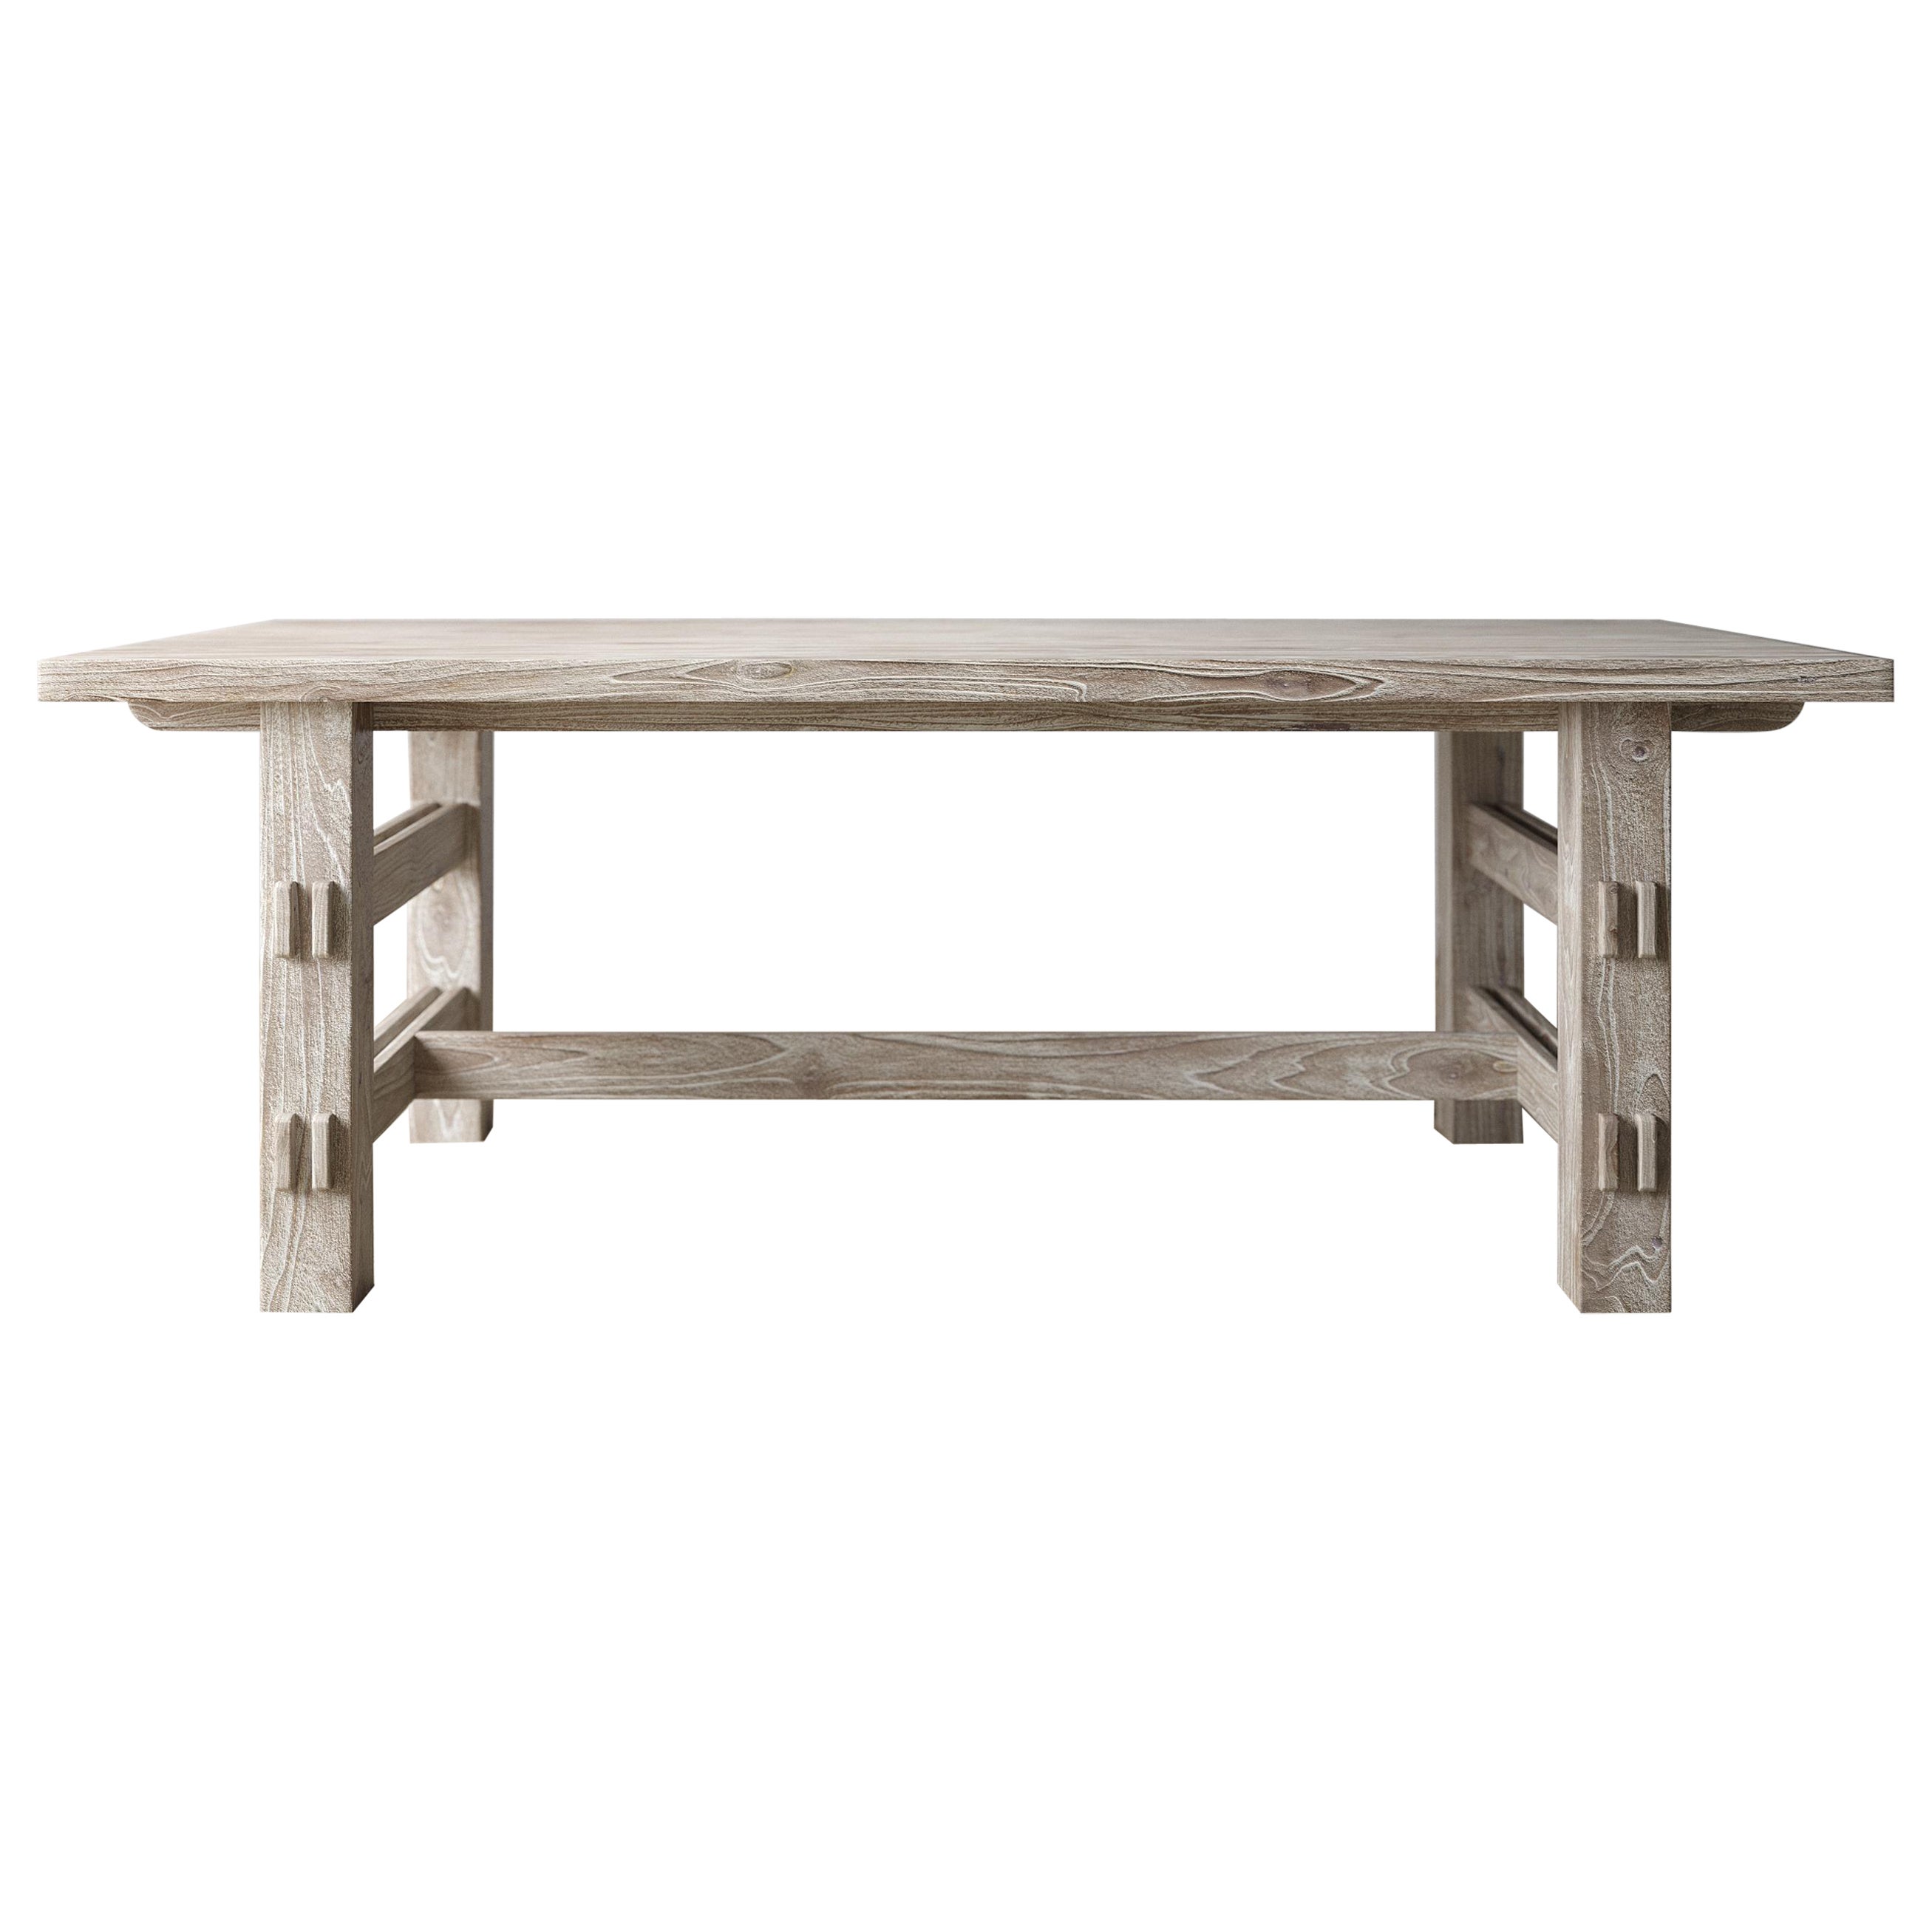 Solid 2" Teak Modern Rustic Dining Table in Sandblasted Sun Bleached Finish For Sale